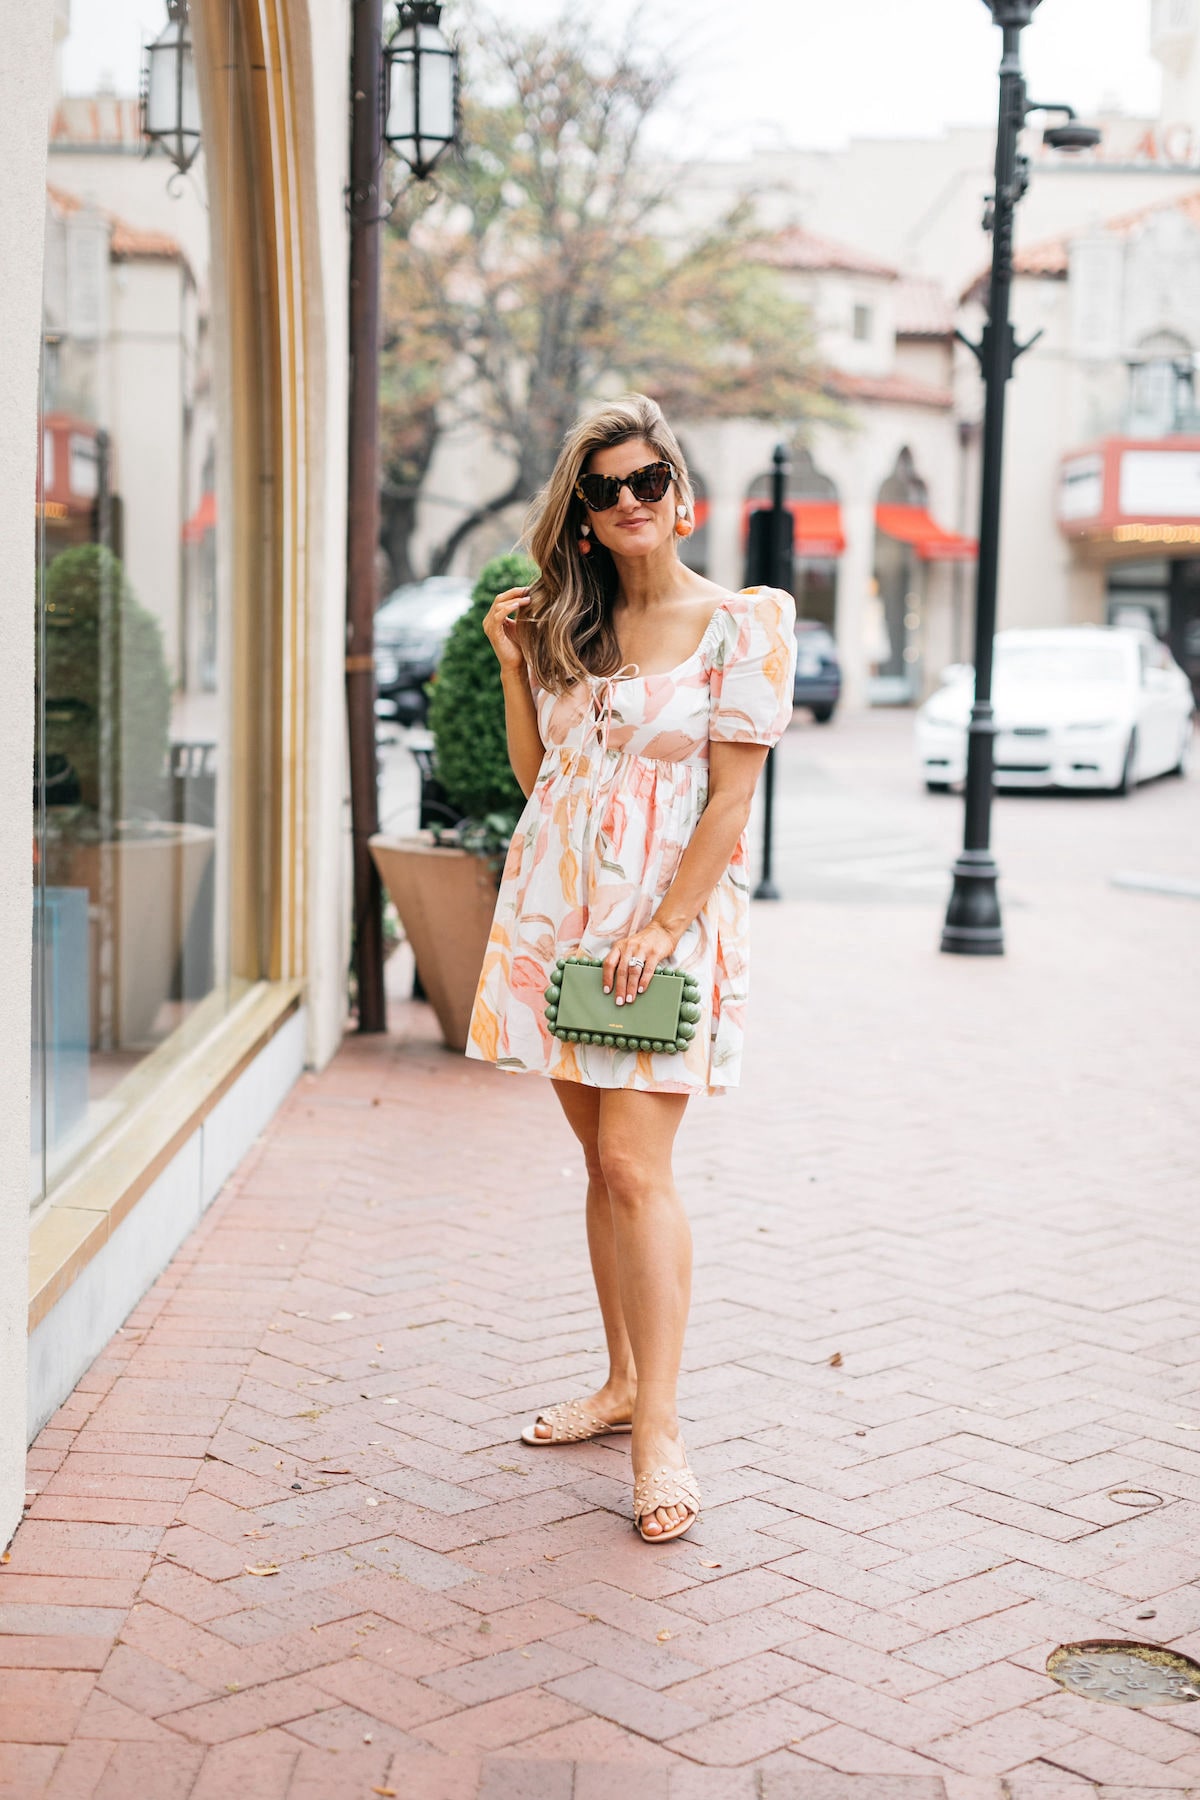 Brighton Butler wearing abercrombie mini dress with coral heels and cult gaia bag